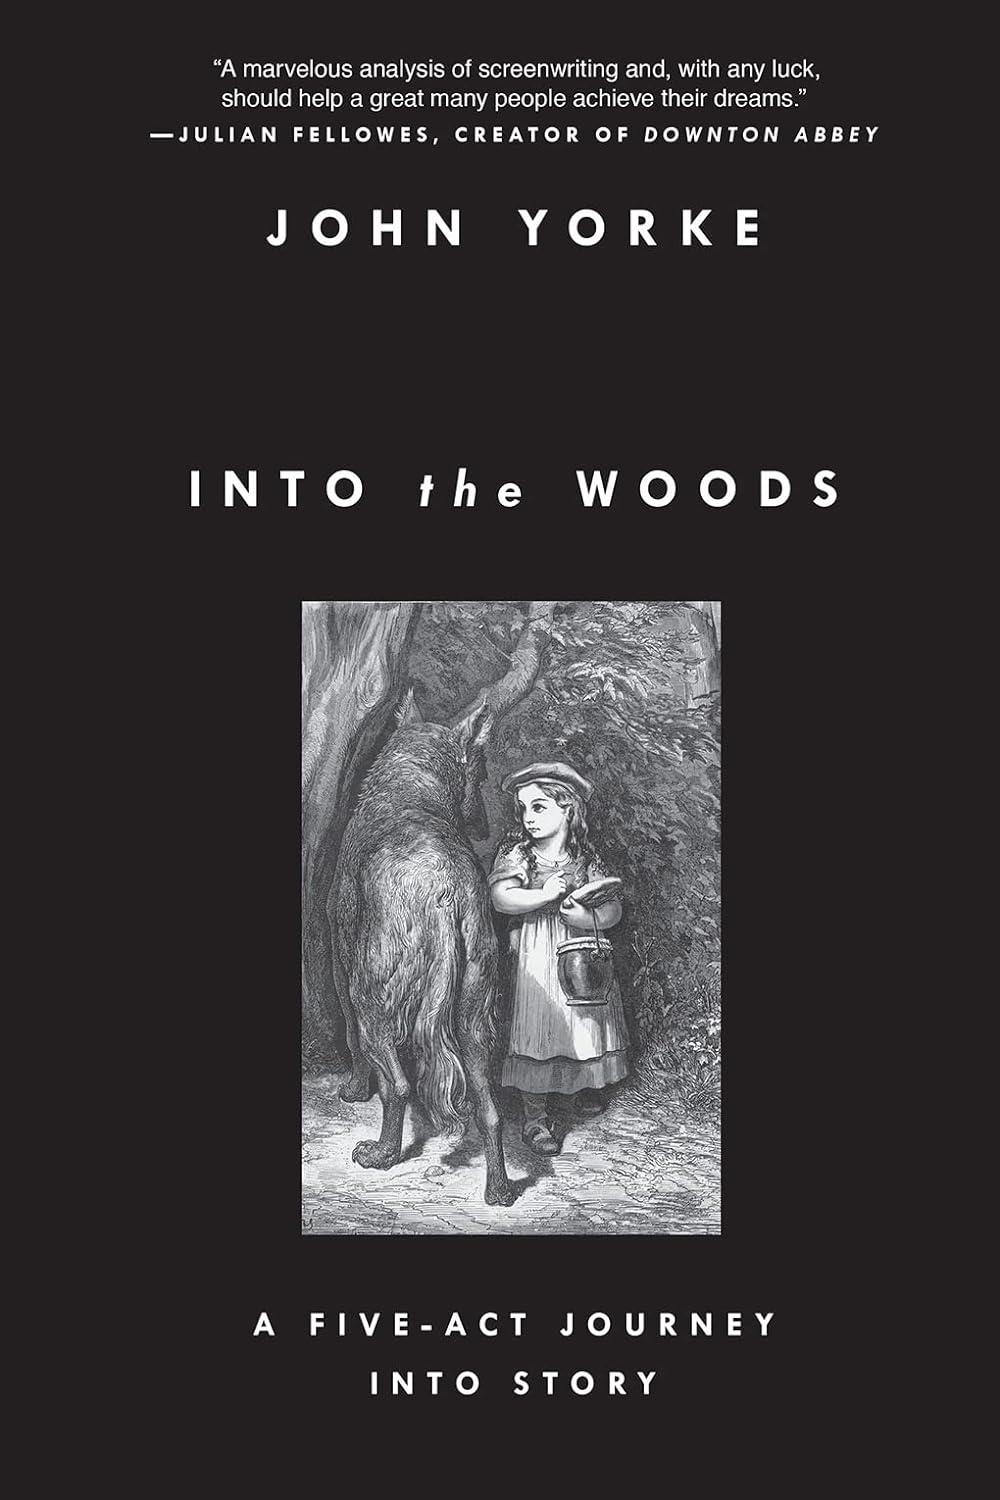 into the woods a five-act journey into story 1st edition john yorke 1468310941, 978-1468310948